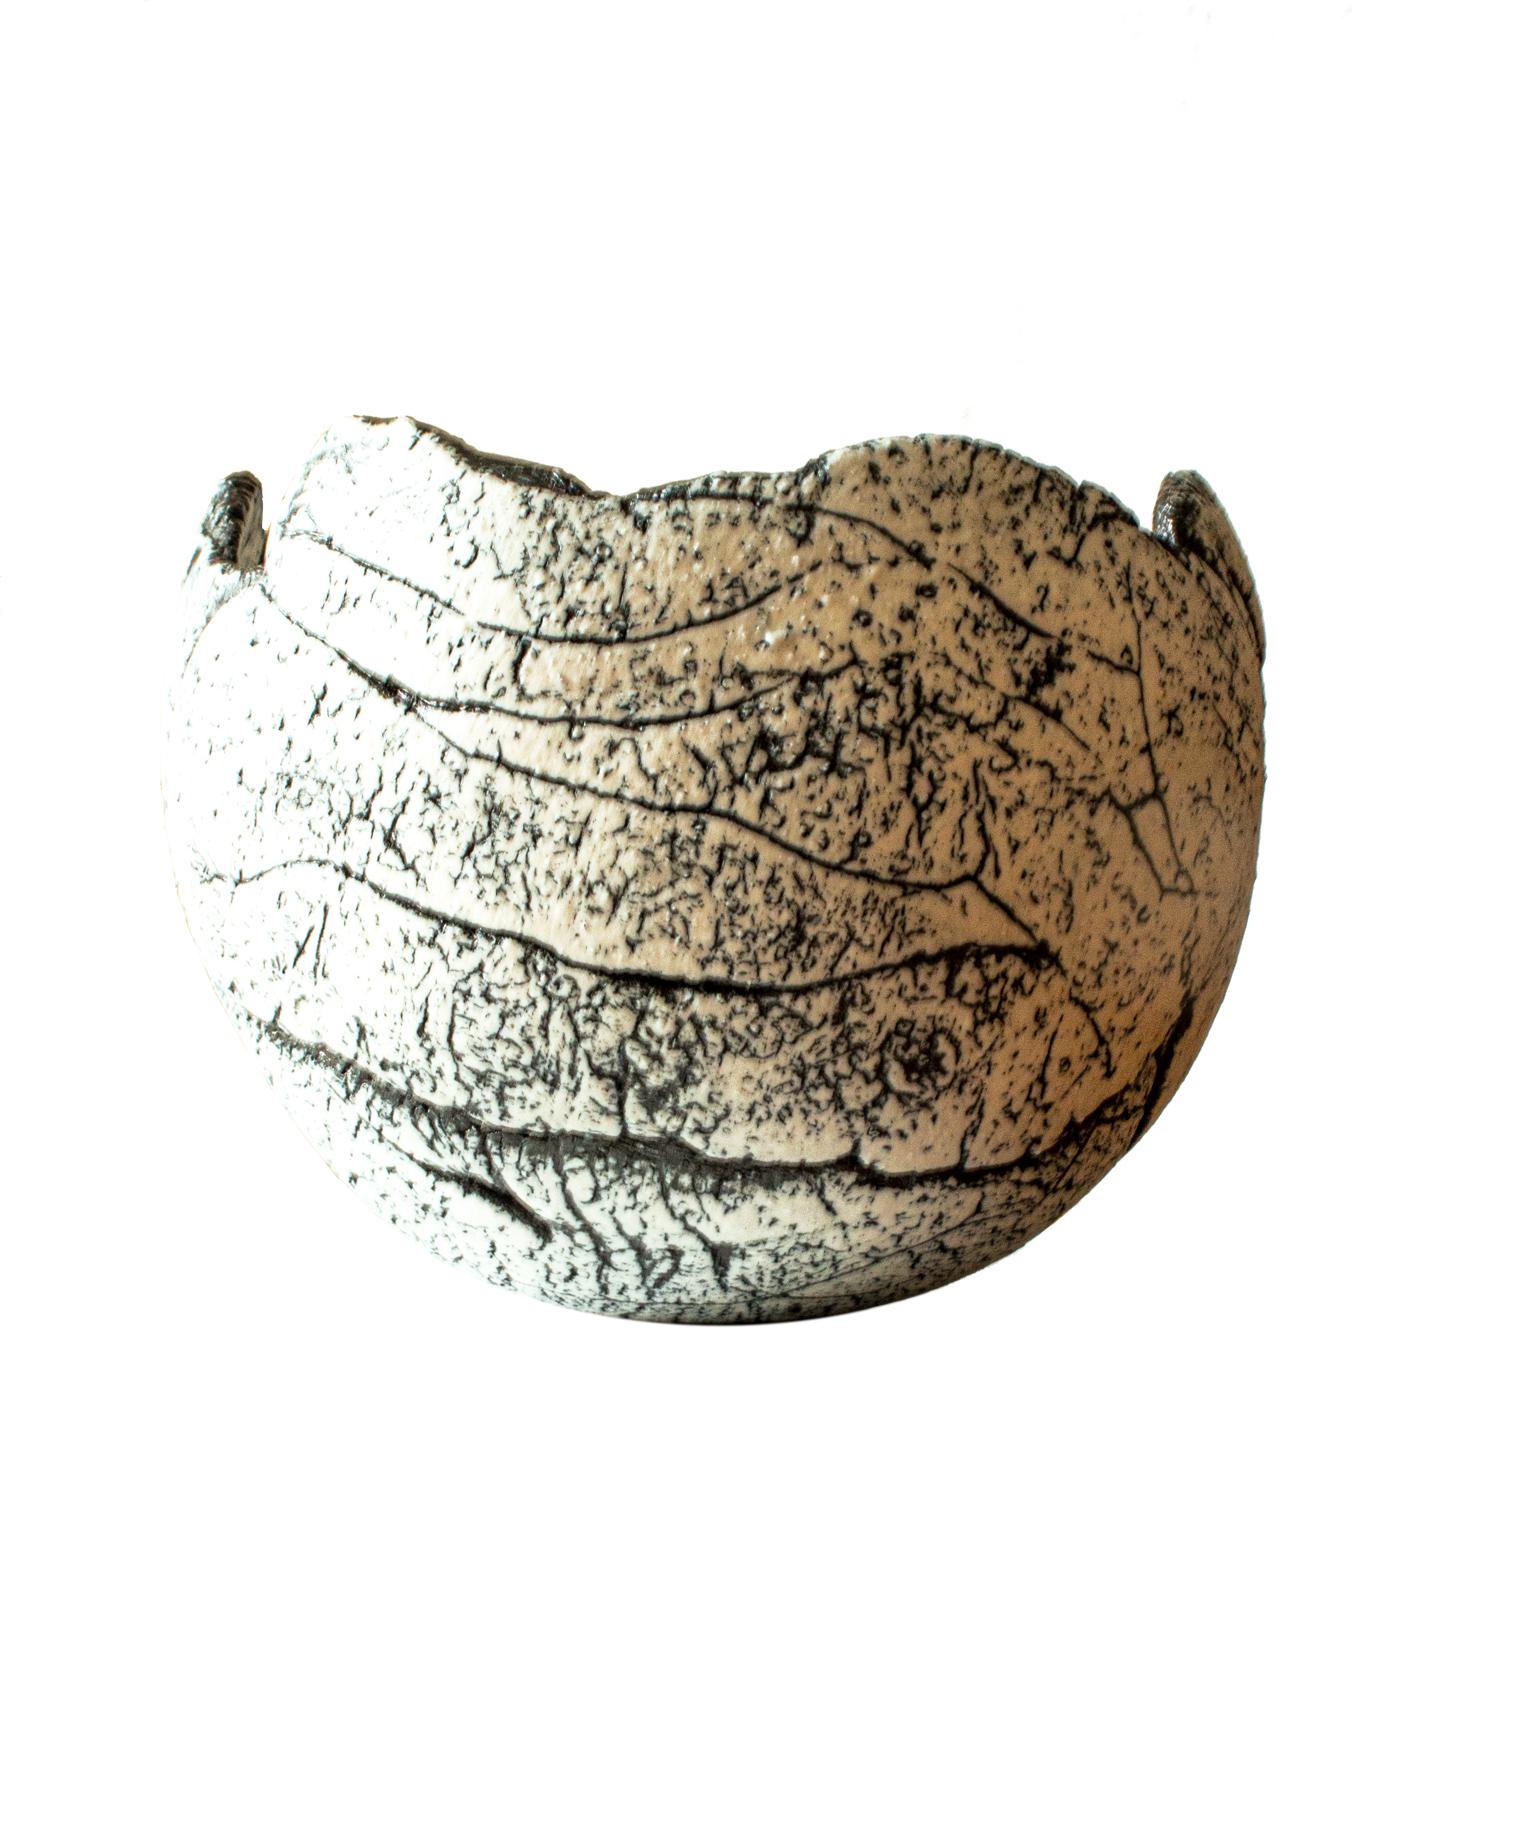 Swedish Scandinavian Modern Brutalist Bowl by Artist Ulla Viotti Made of White Clay For Sale